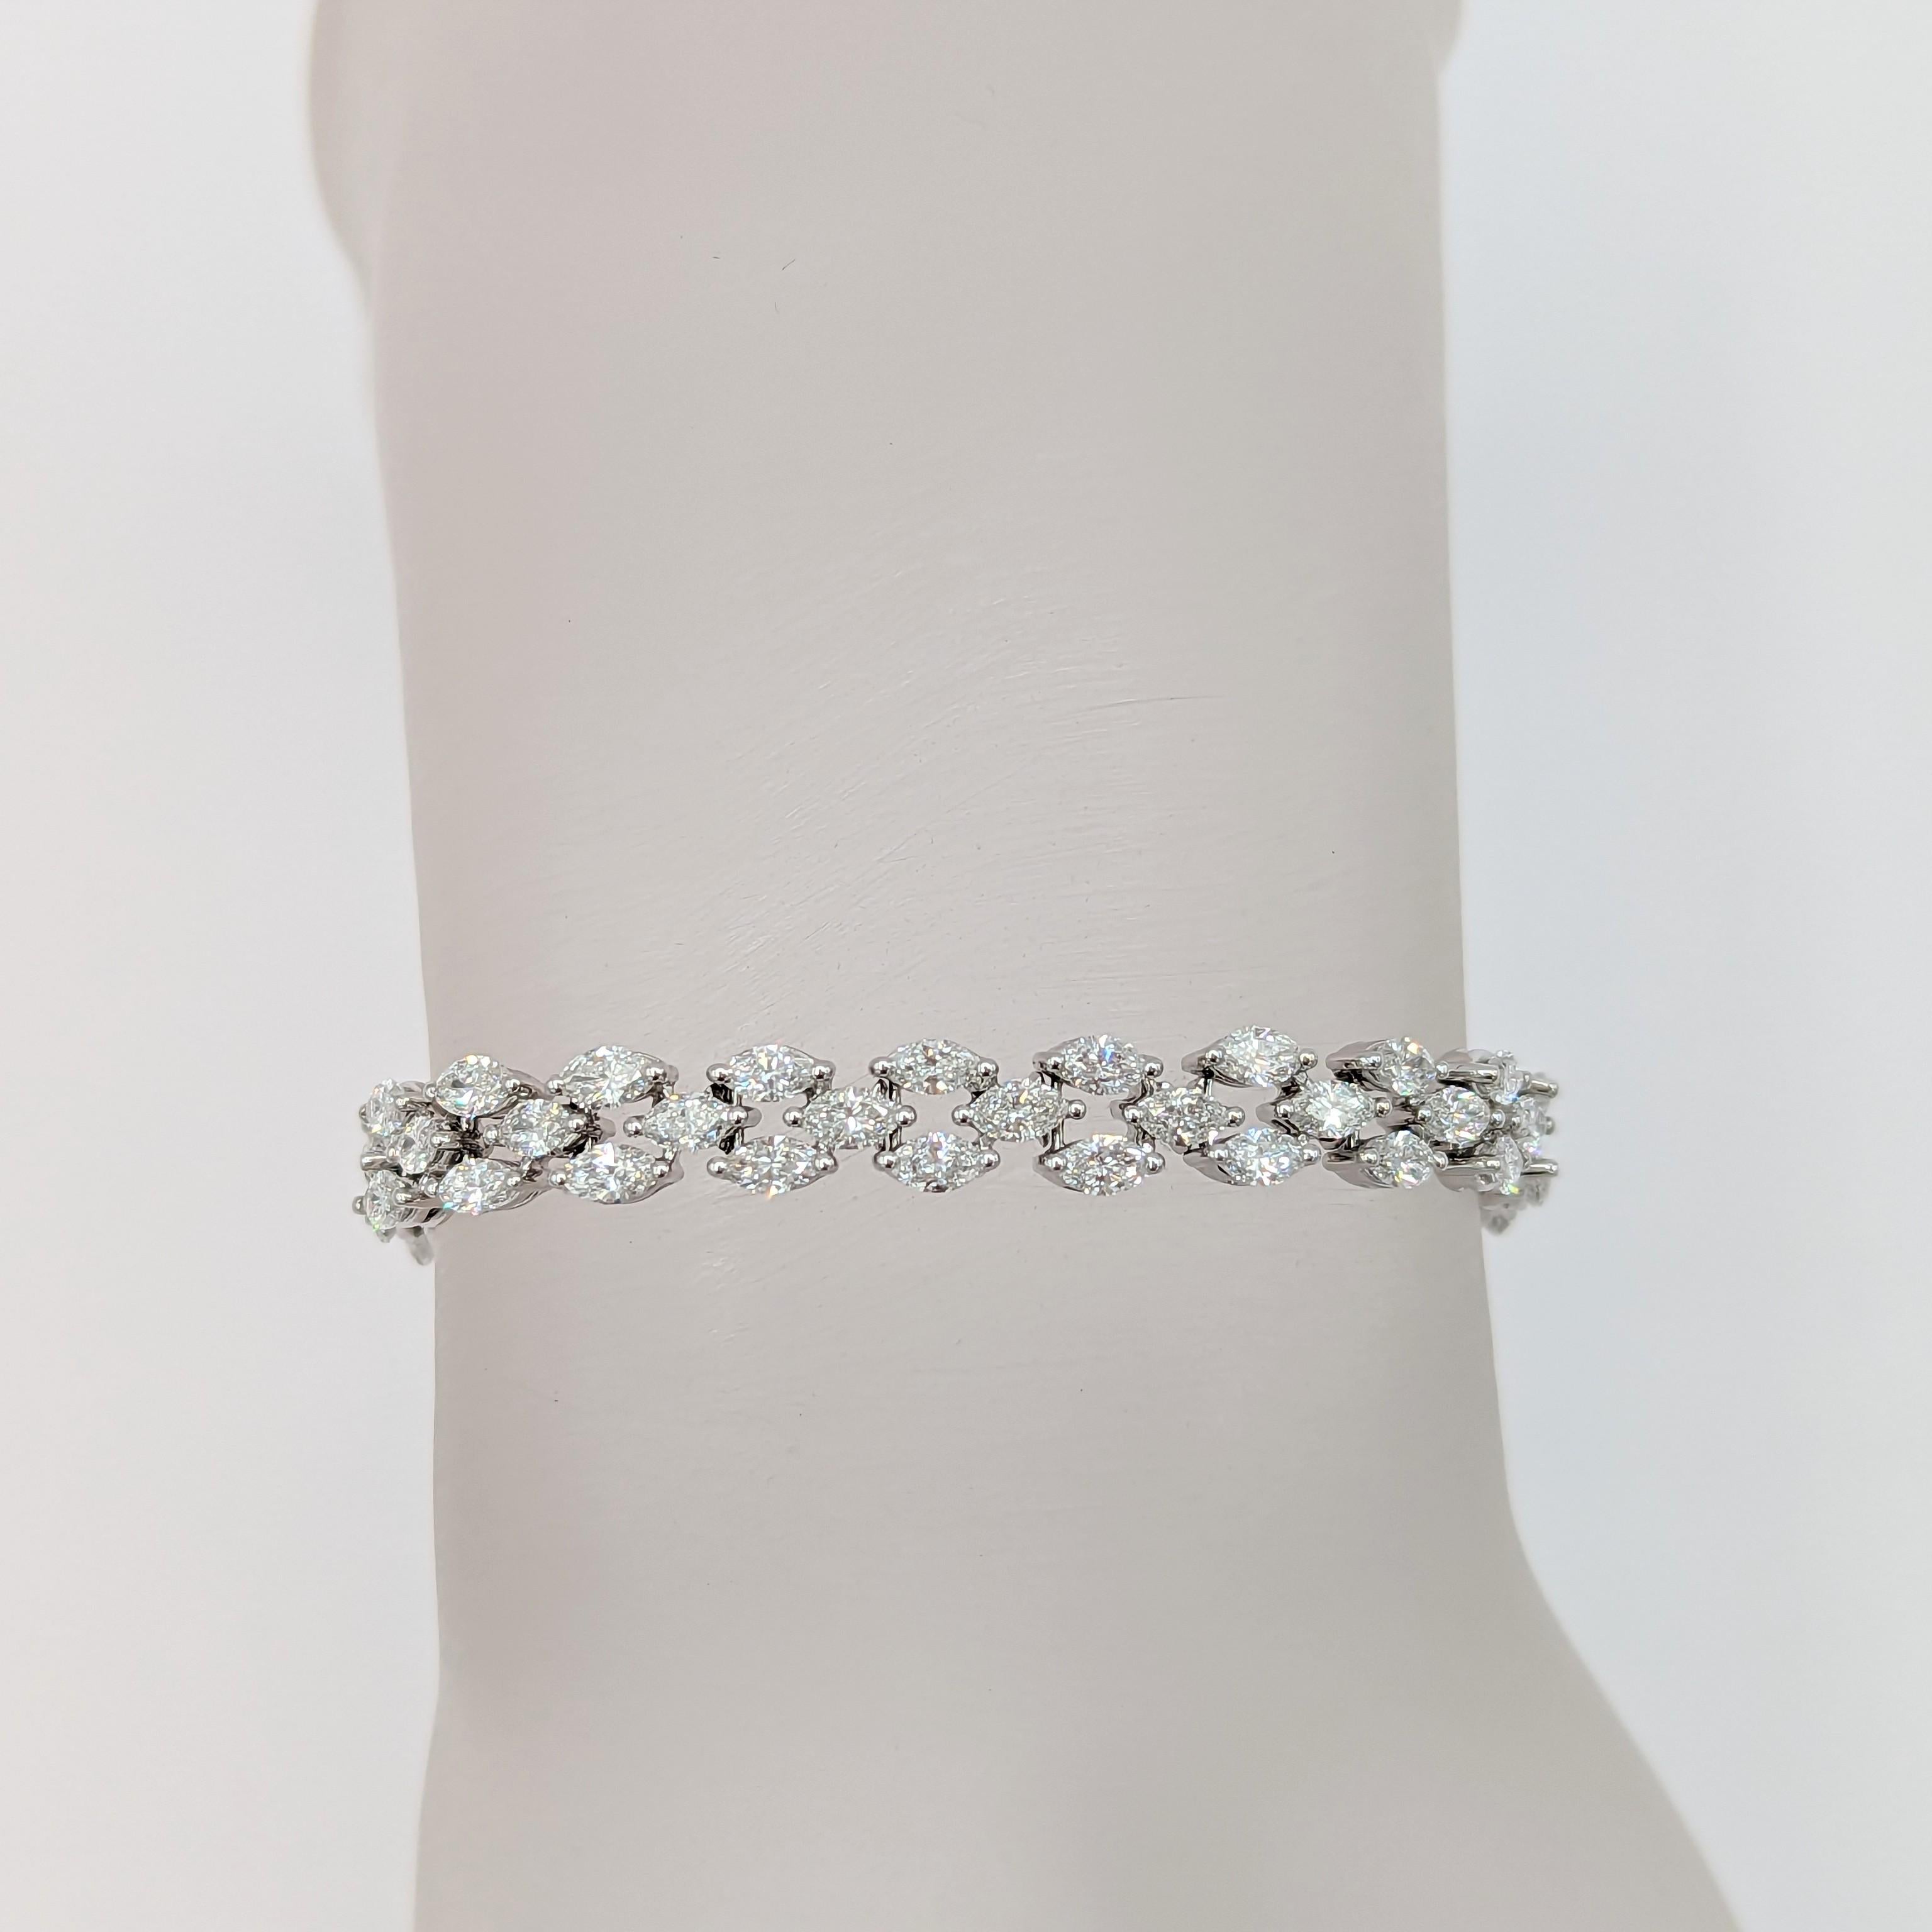 Beautiful 7.60 ct. white diamond marquise stones handmade in 14k white gold.  This bracelet is simple yet so classy and different from the usual round diamond tennis bracelet.  Length is 7